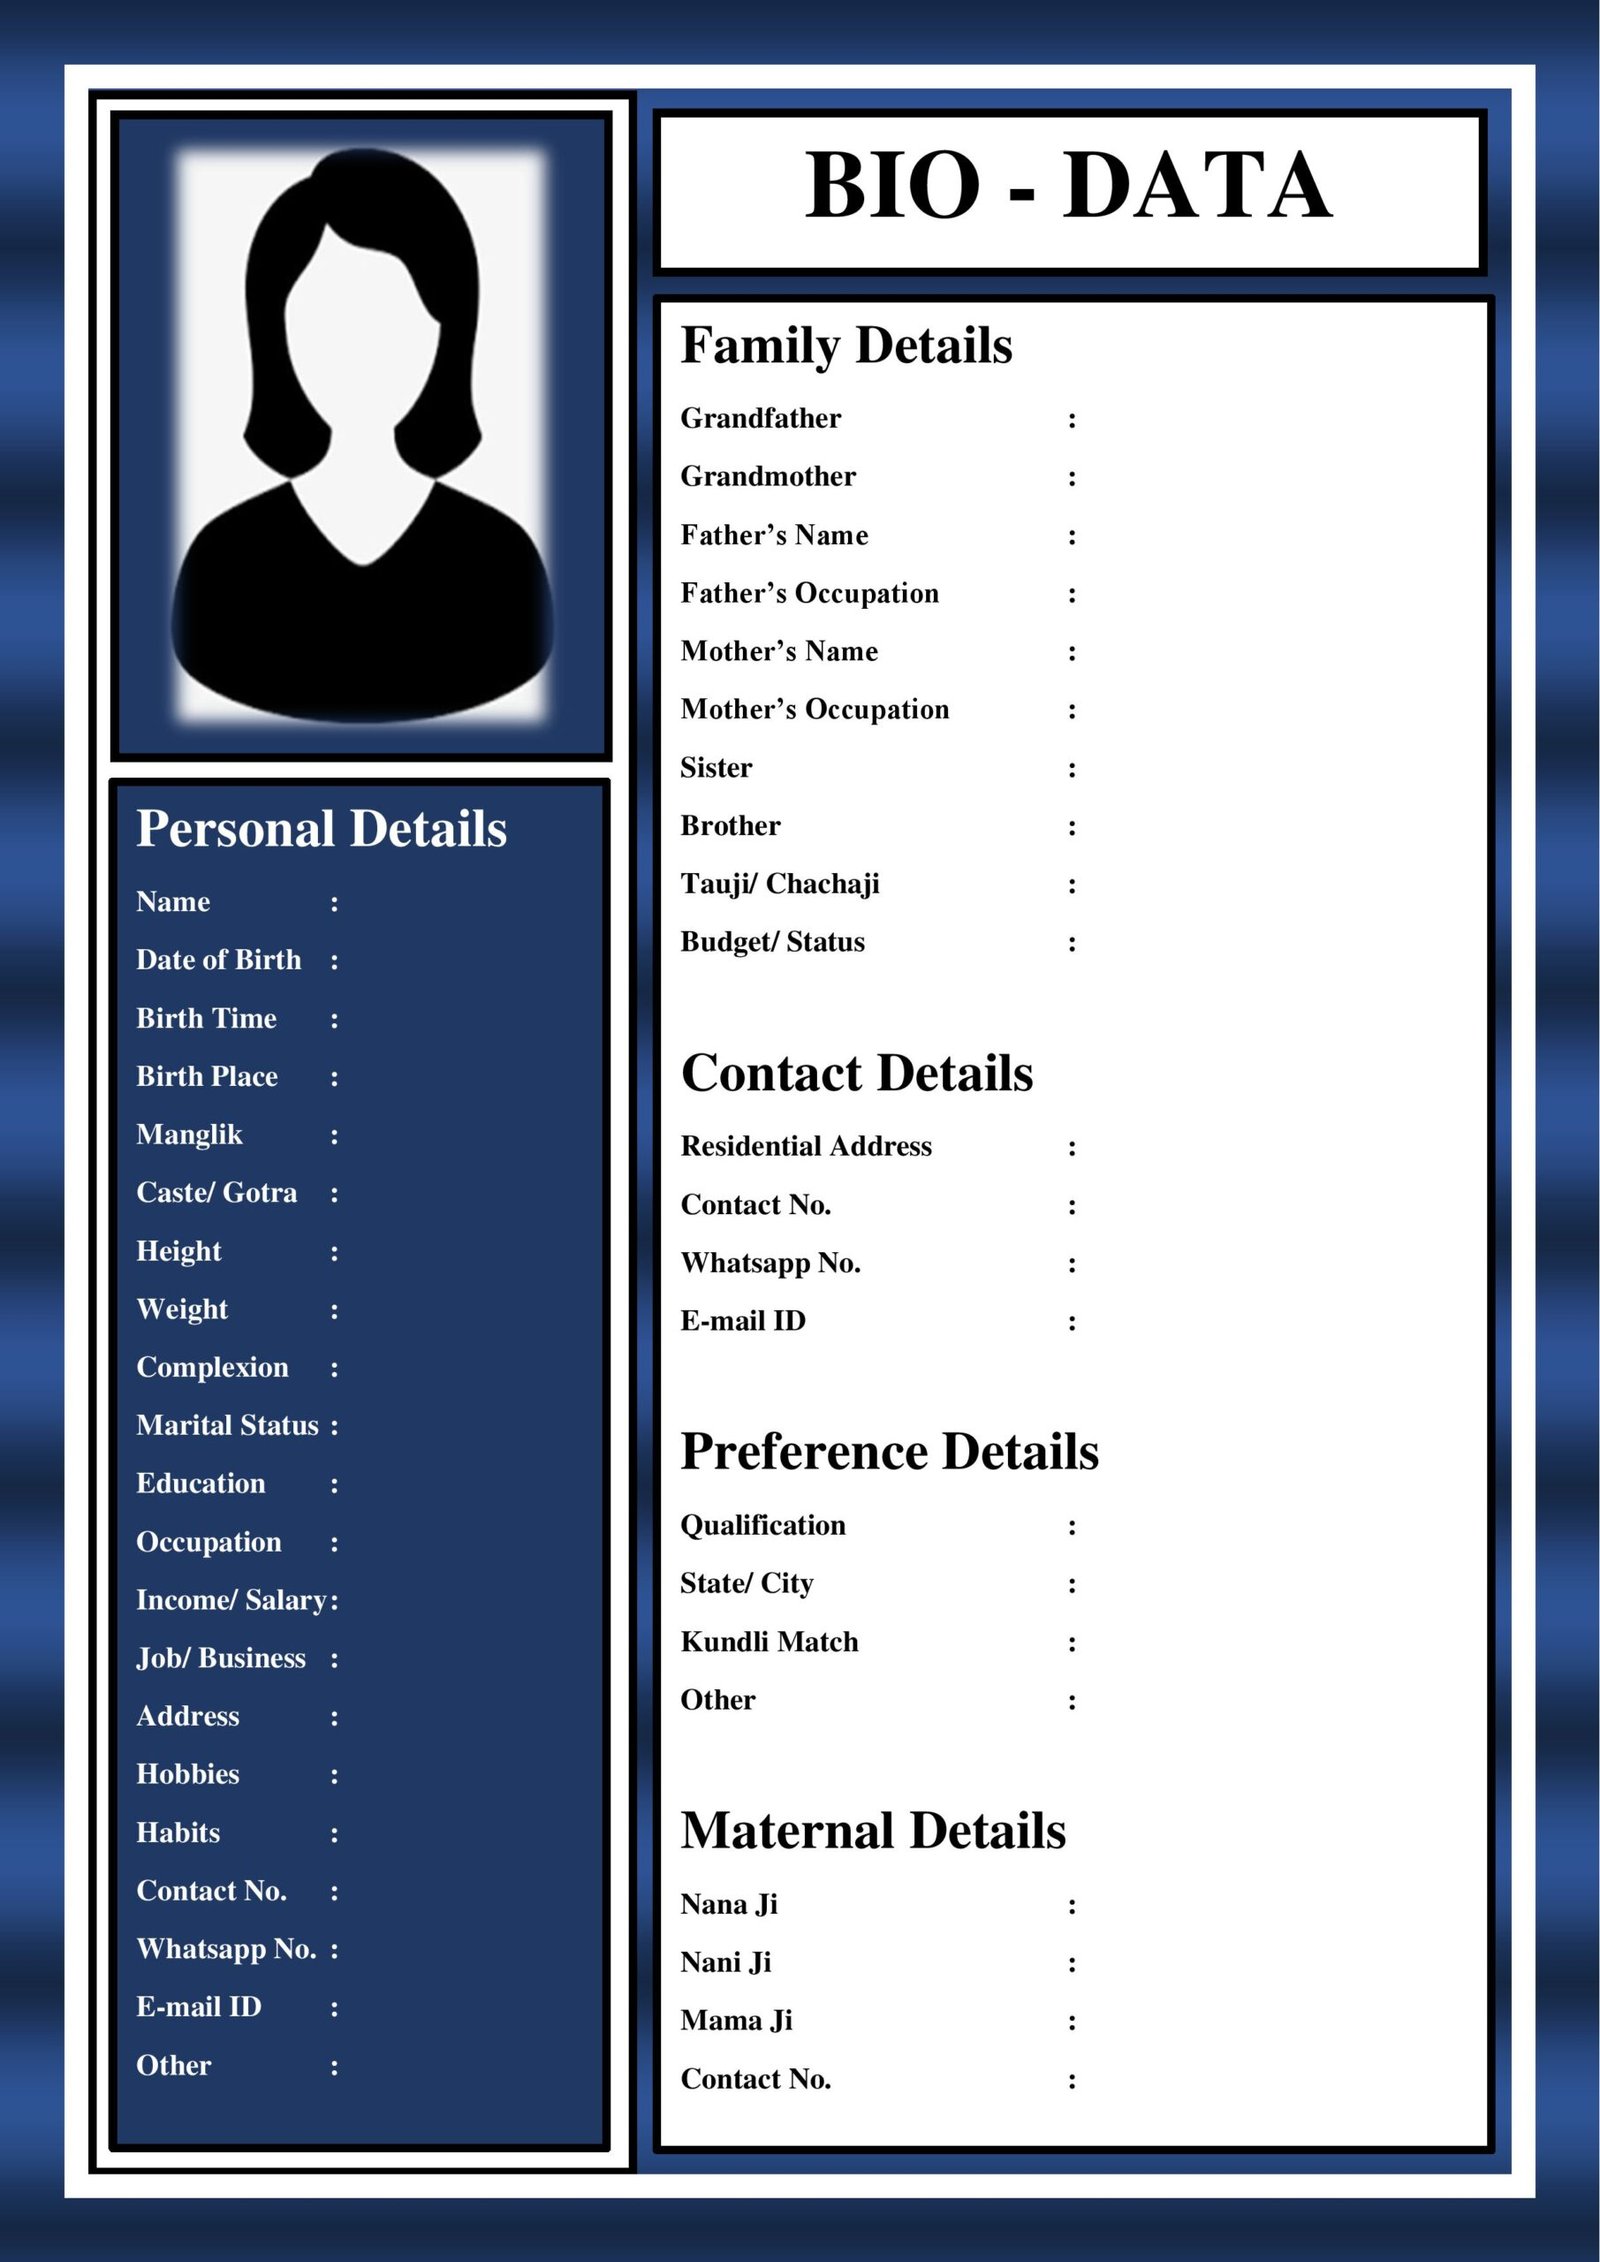 Marriage Biodata Format For Boys With 2 Profile Photo 3443